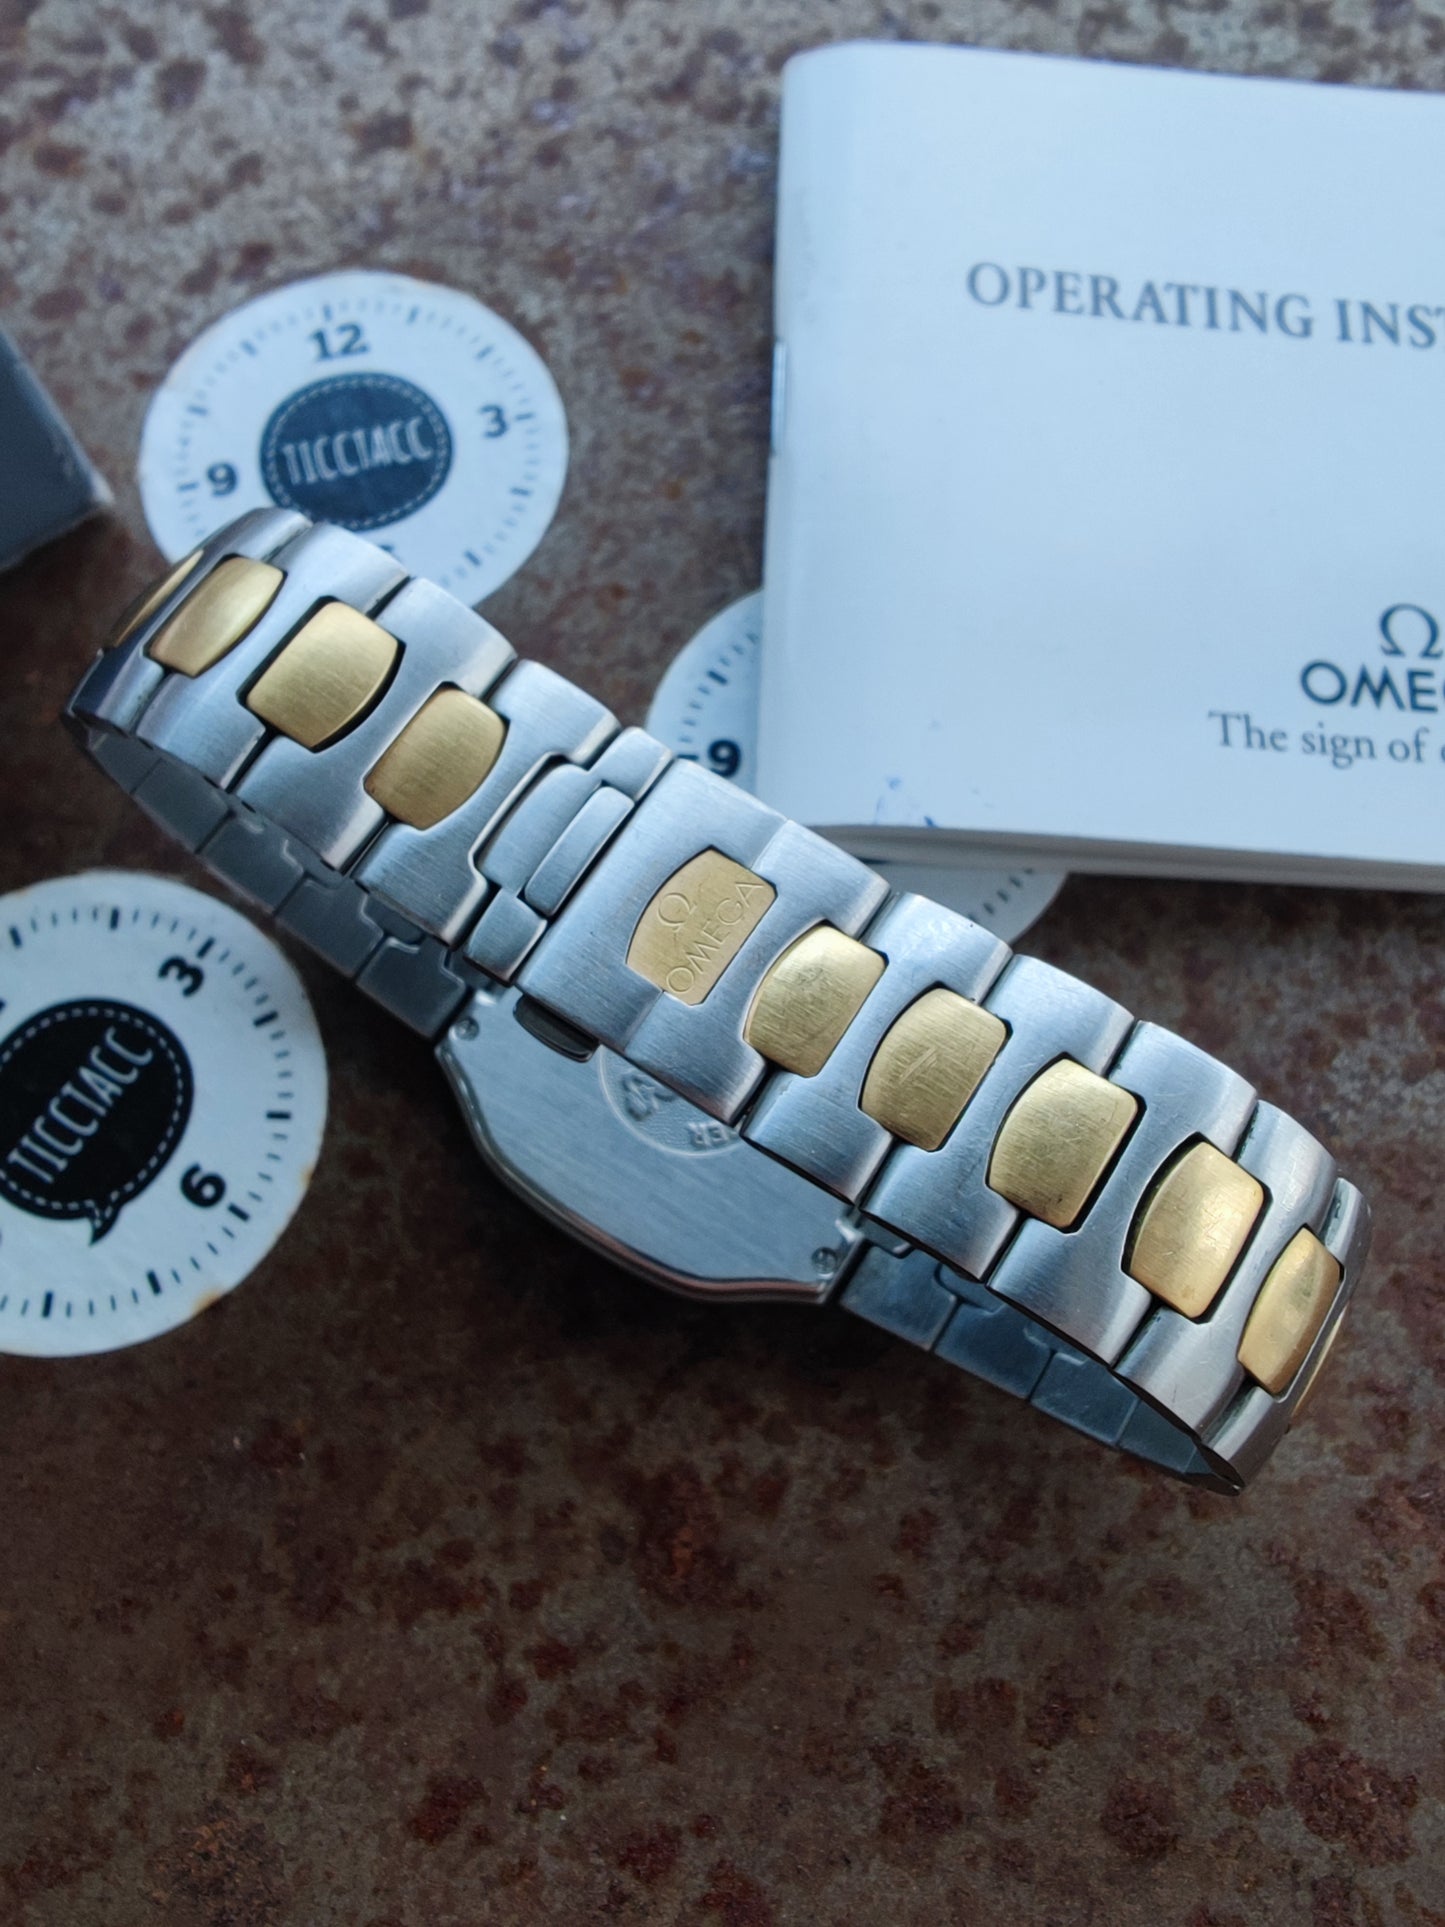 MINT OMEGA Polaris Multi- functional stainless steel / gold Box & manual